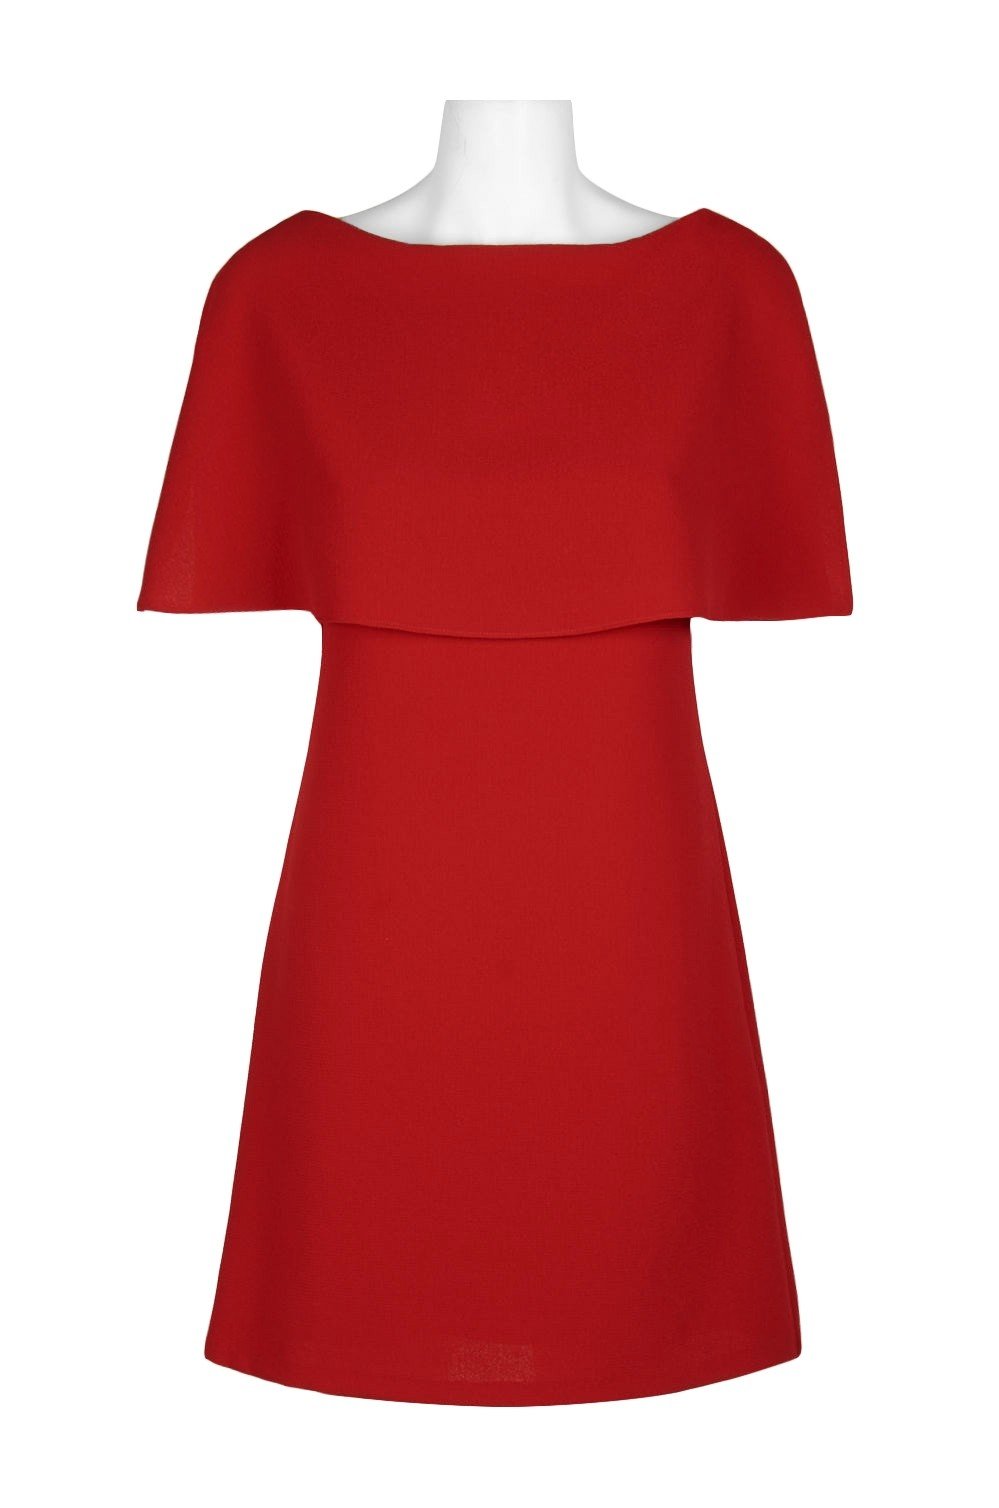 Adrianna Papell - AP1D100716 Popover Cape Crepe Shift Dress in Red